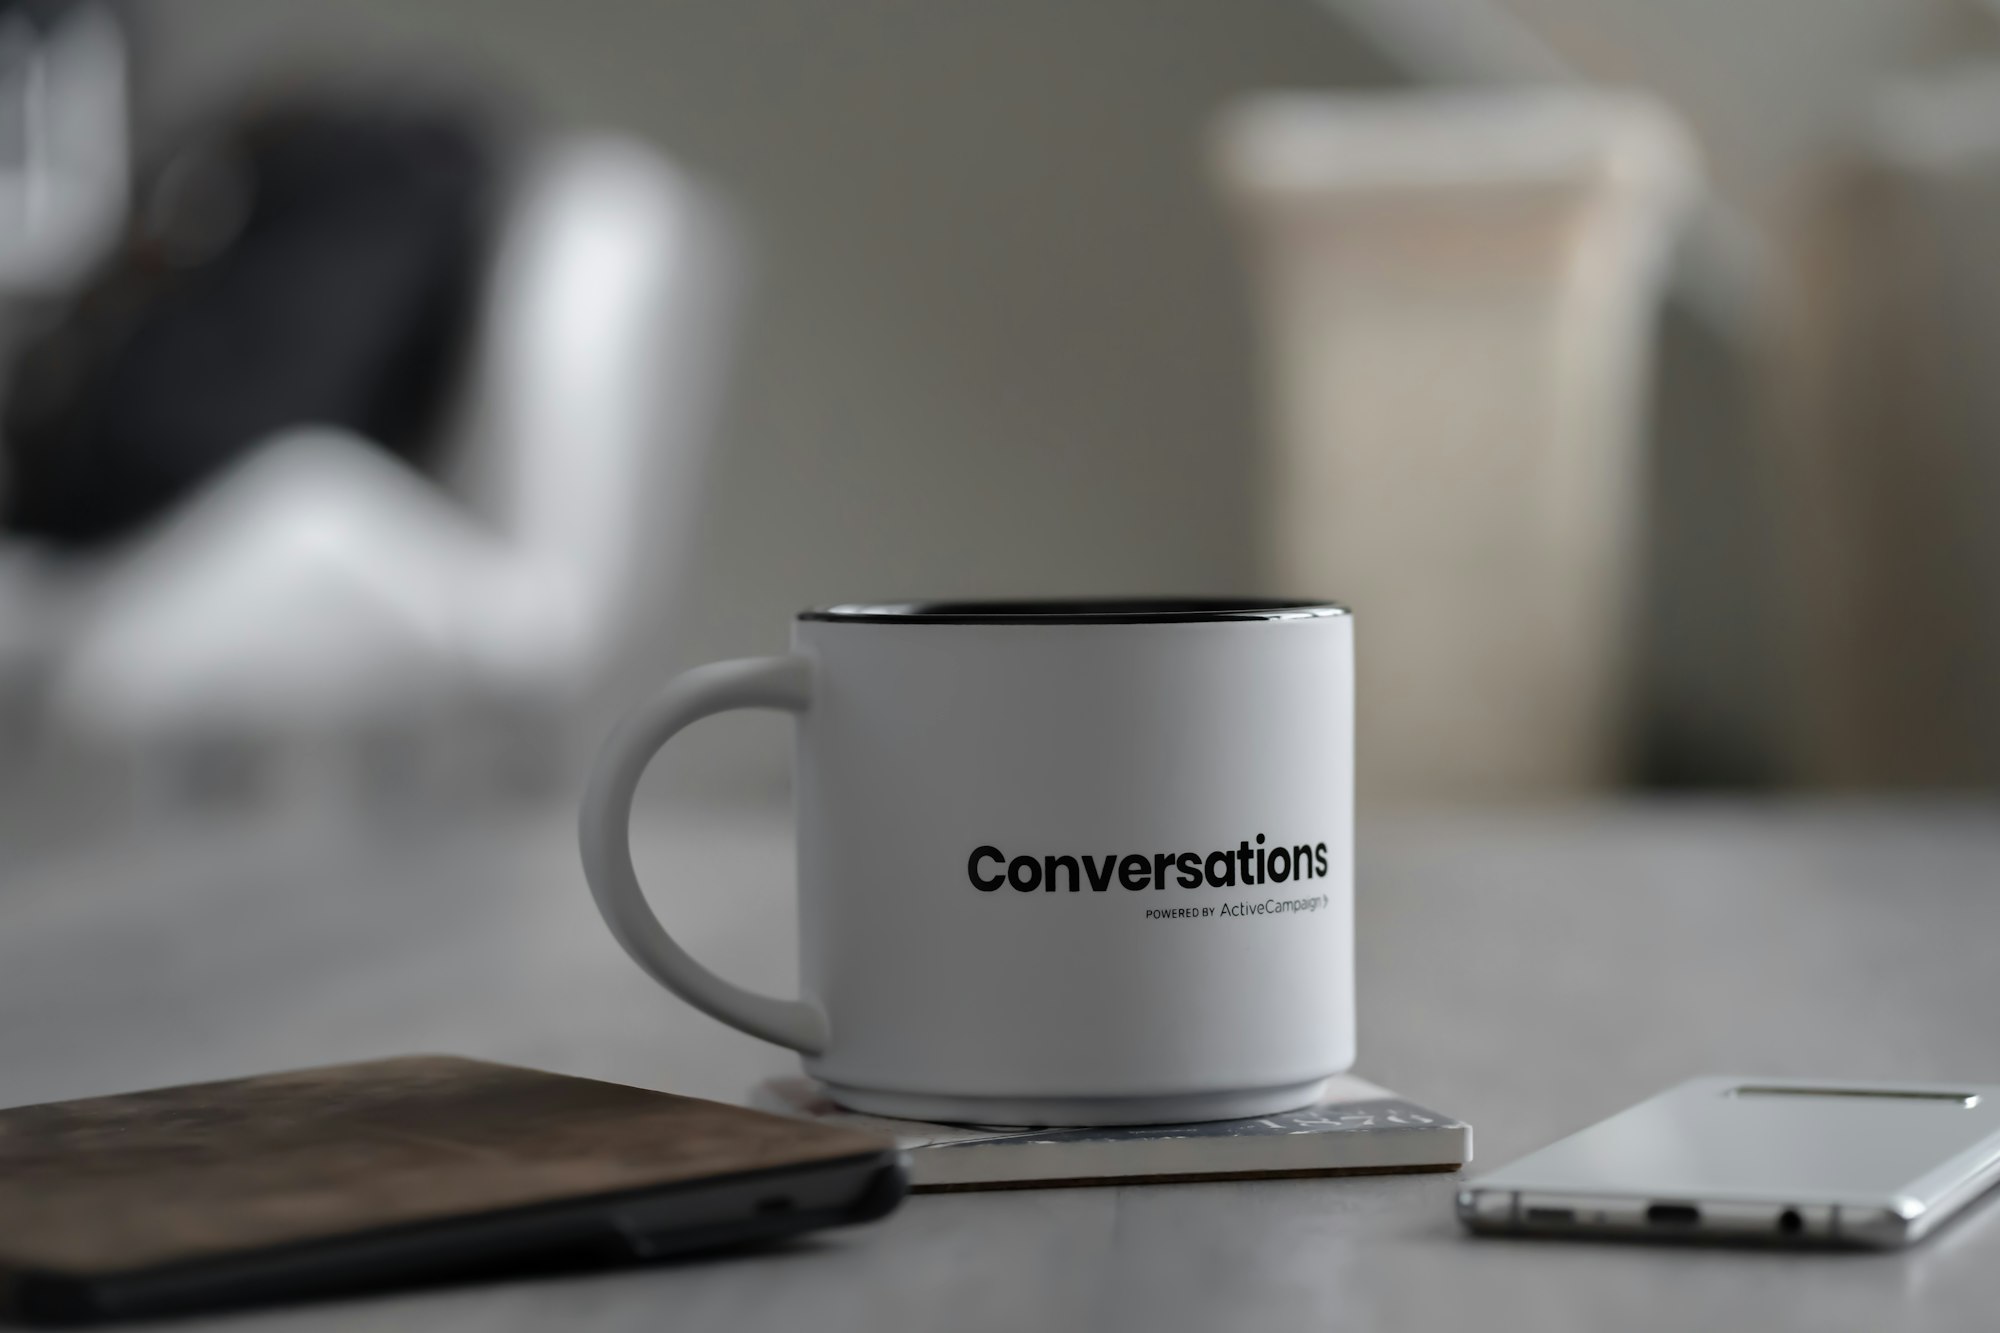 Just a picture of my Conversations mug I received from ActiveCampaign for working on the Android app. Also featured is my Kindle and phone.